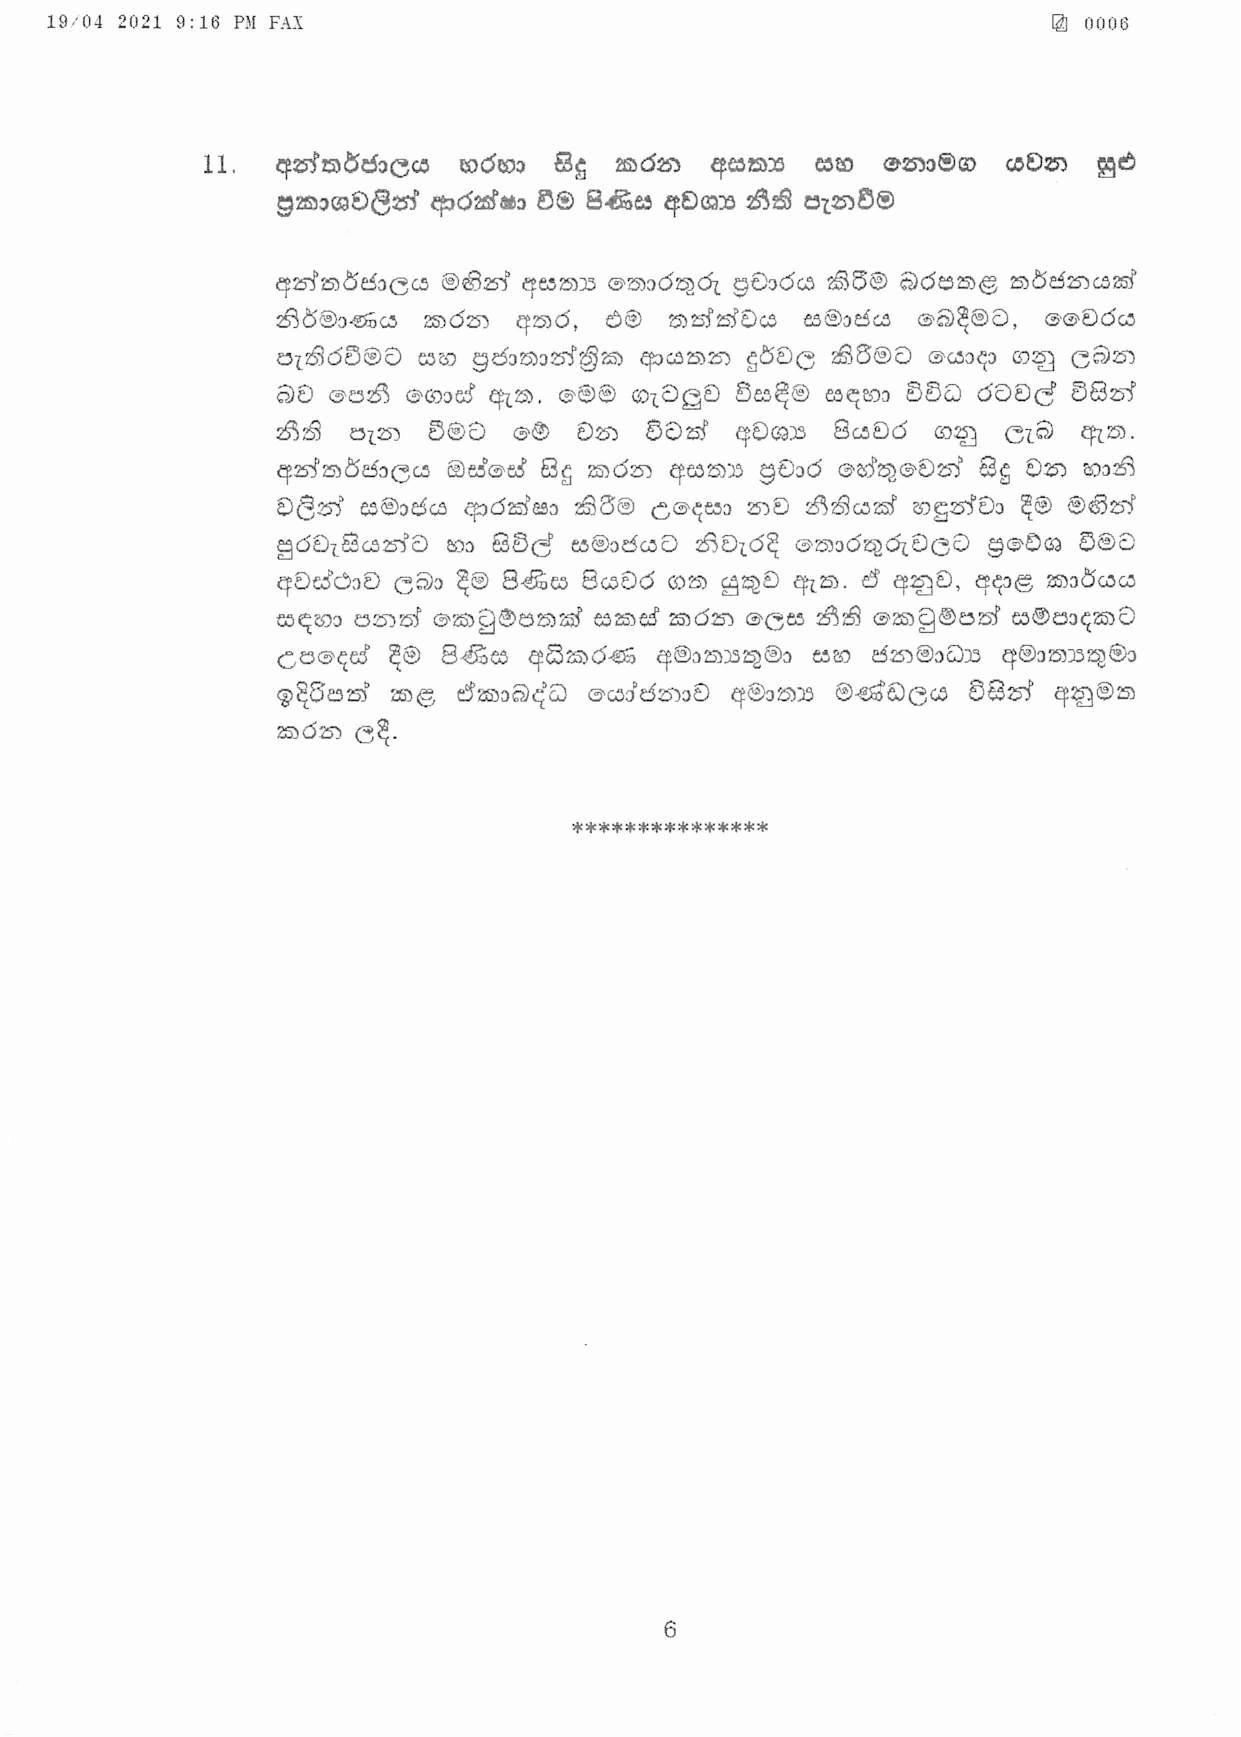 Cabinet Decision on 19.04.2021 Sinhala page 006